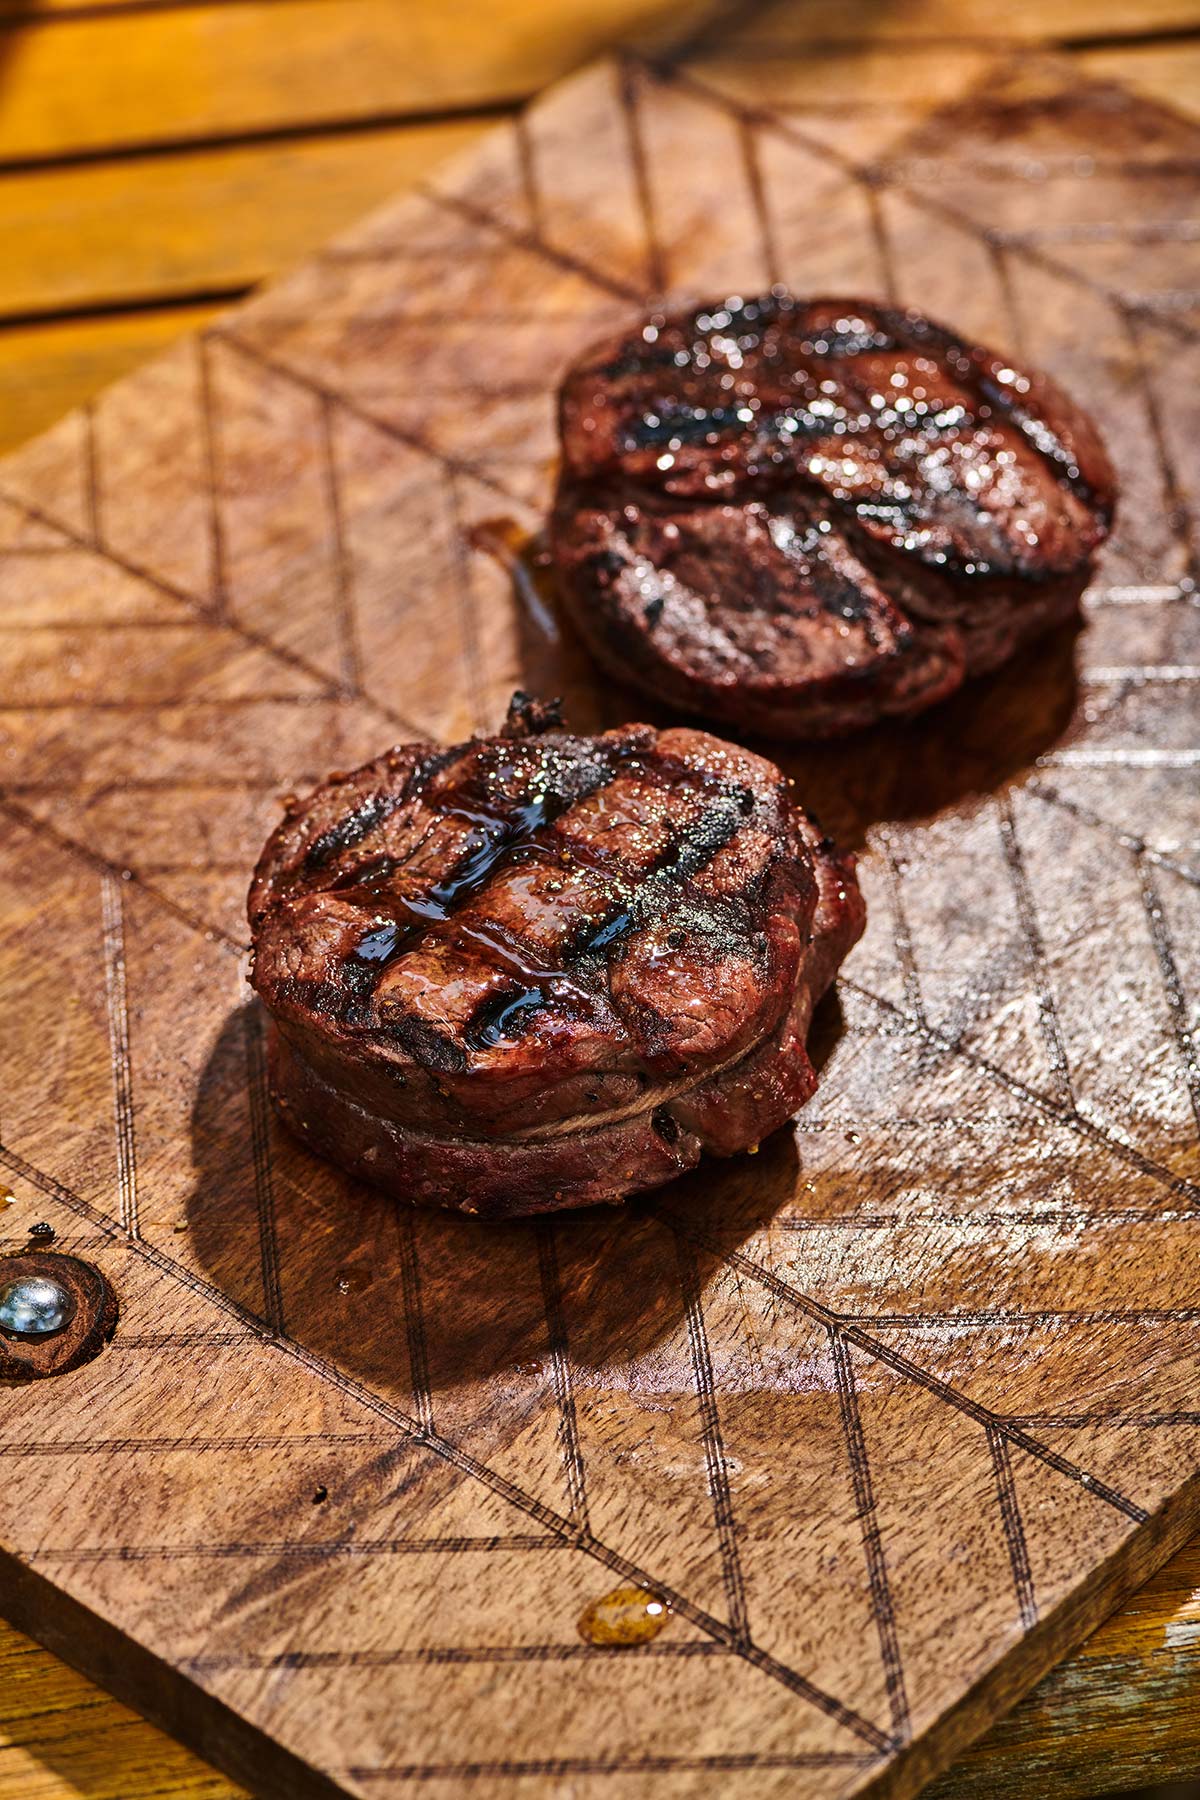 Cooked filet mignon steaks with cross-hatch grill marks on cutting board.